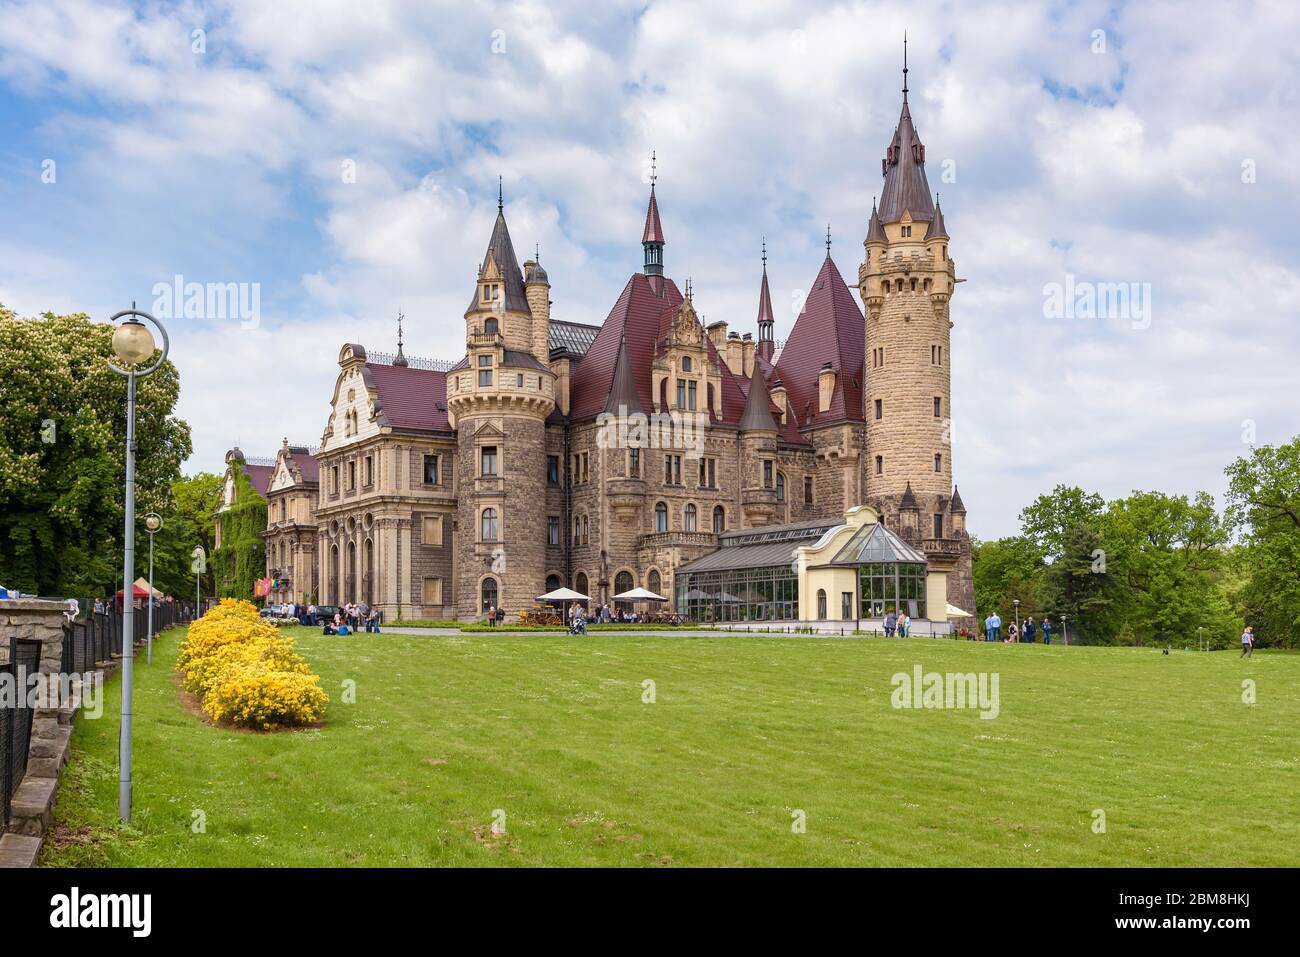 Moszna, Poland - May 21, 2017: View of the 17th century neobaroque Moszna Castle in southwestern Poland, often featured in the list of most beautiful Stock Photo